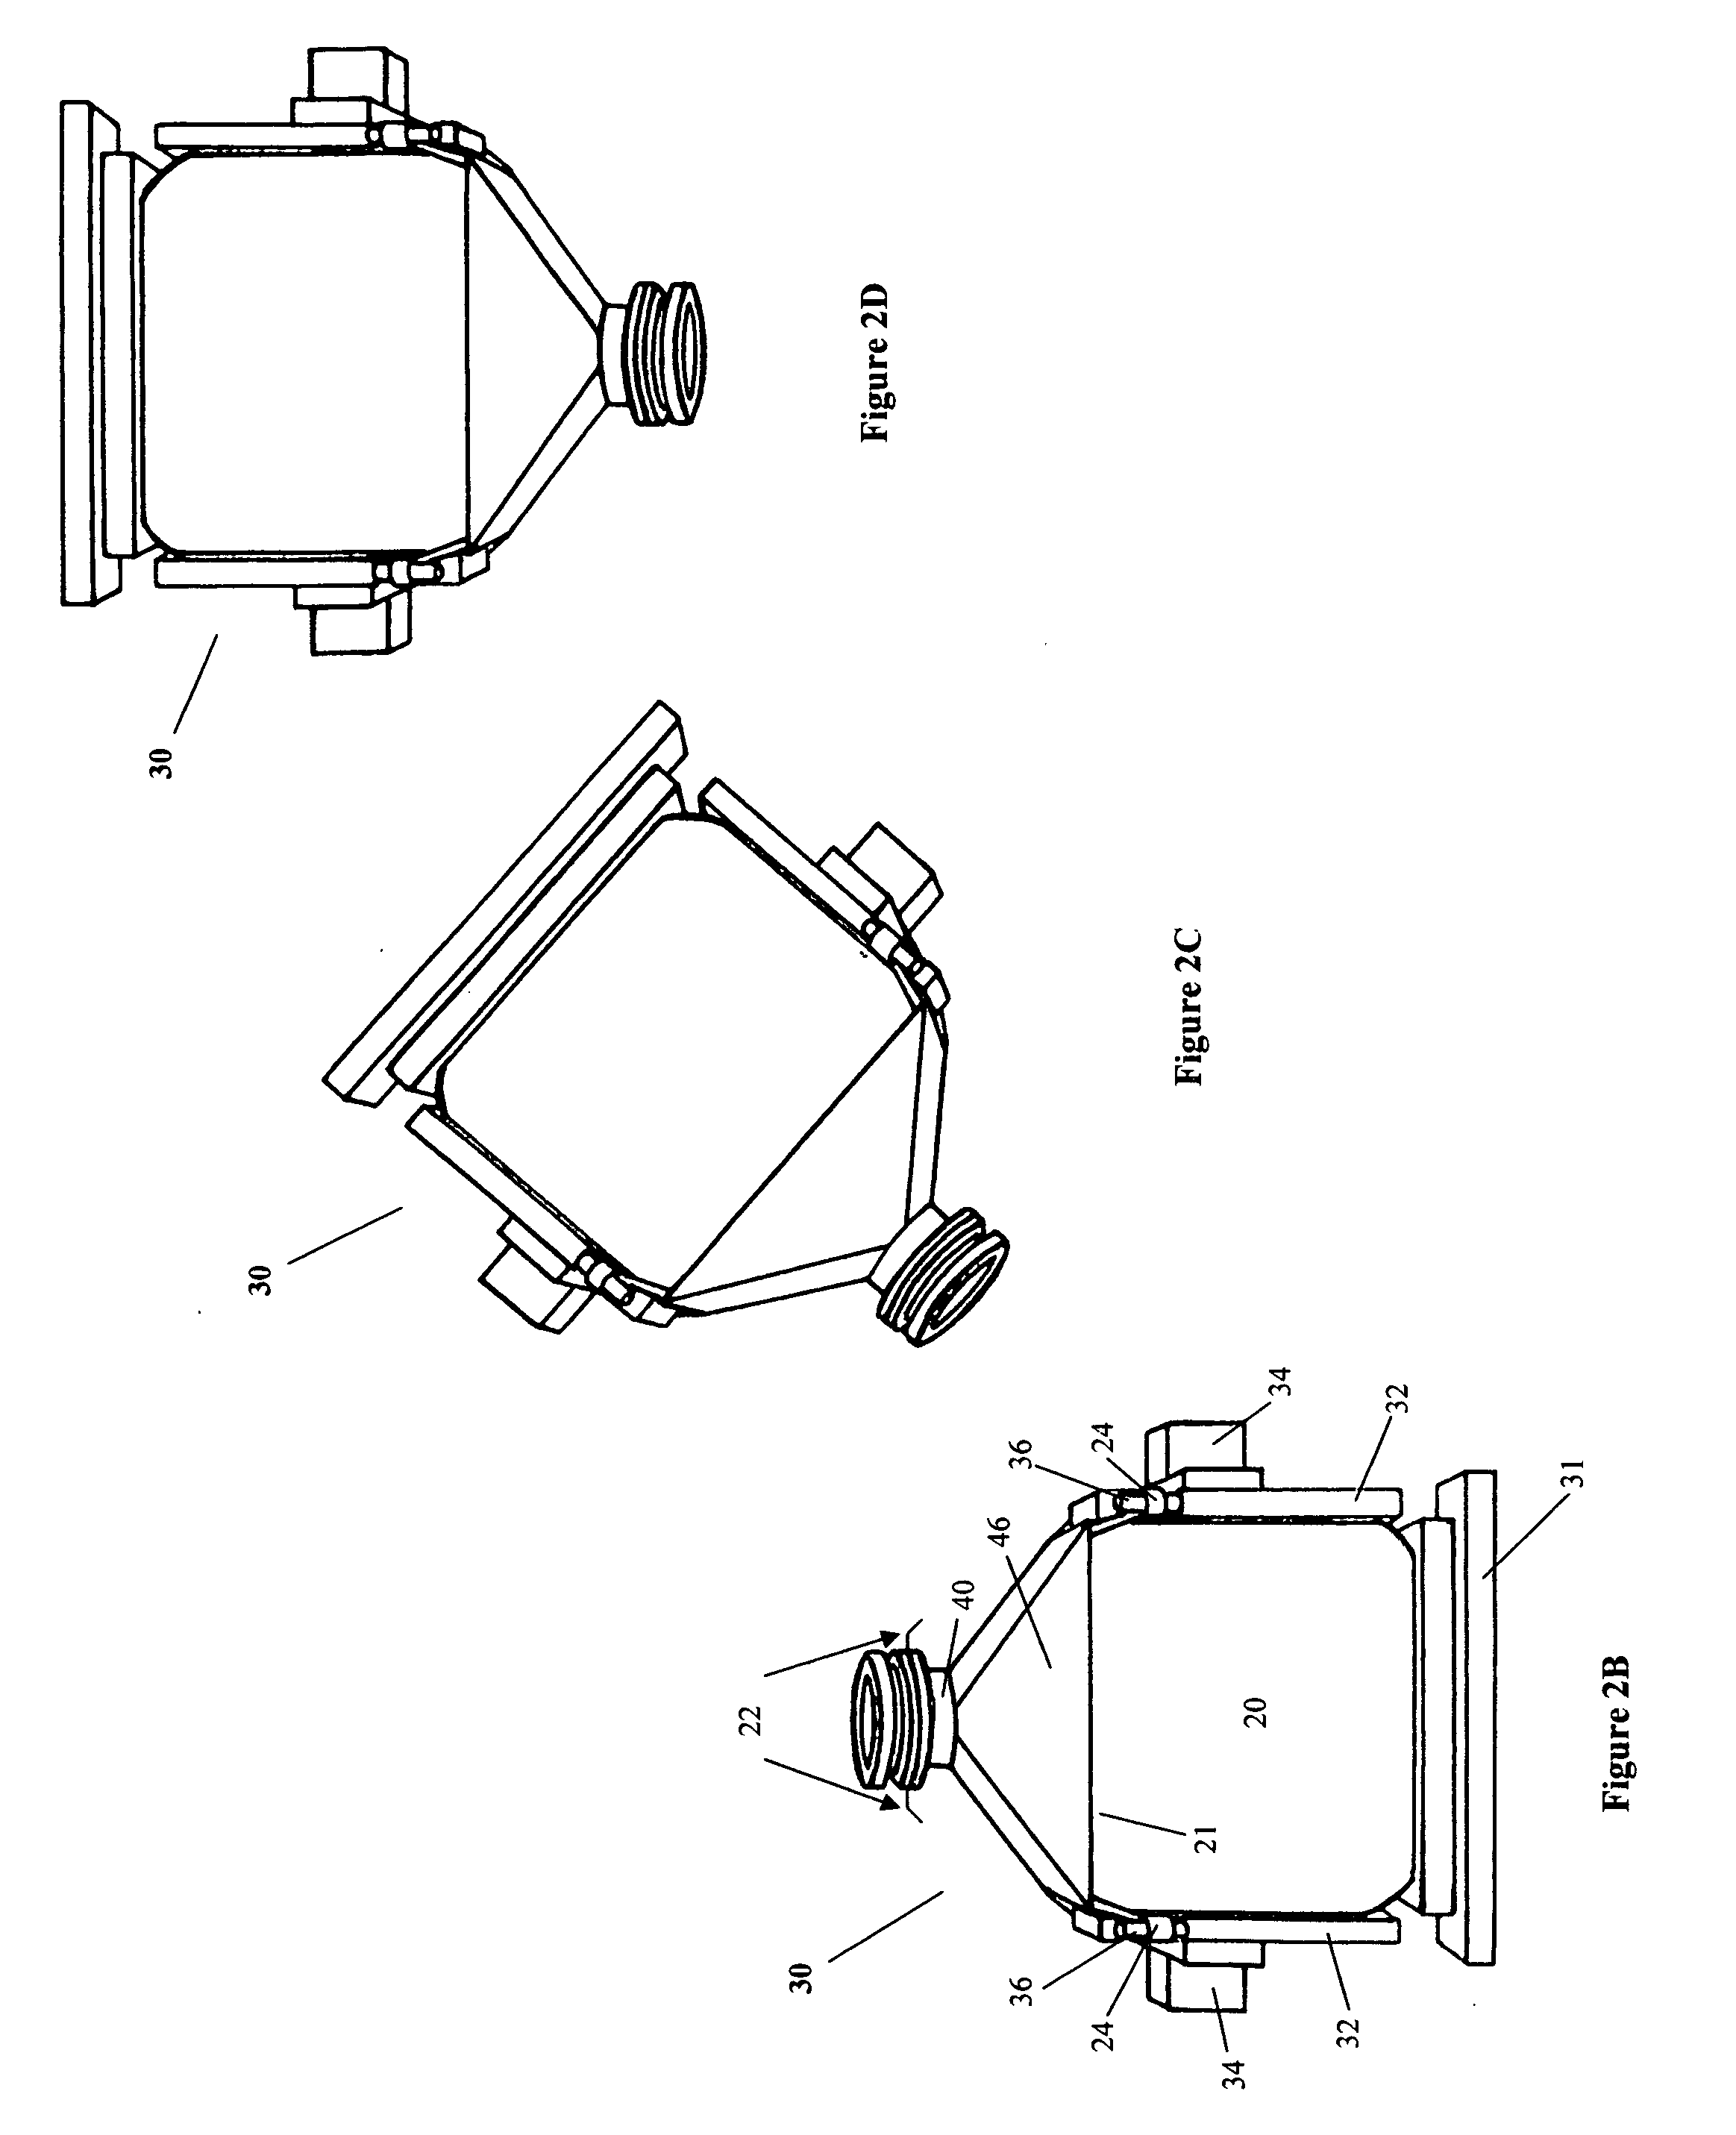 Apparatus for the discharge of product from a bulk bag